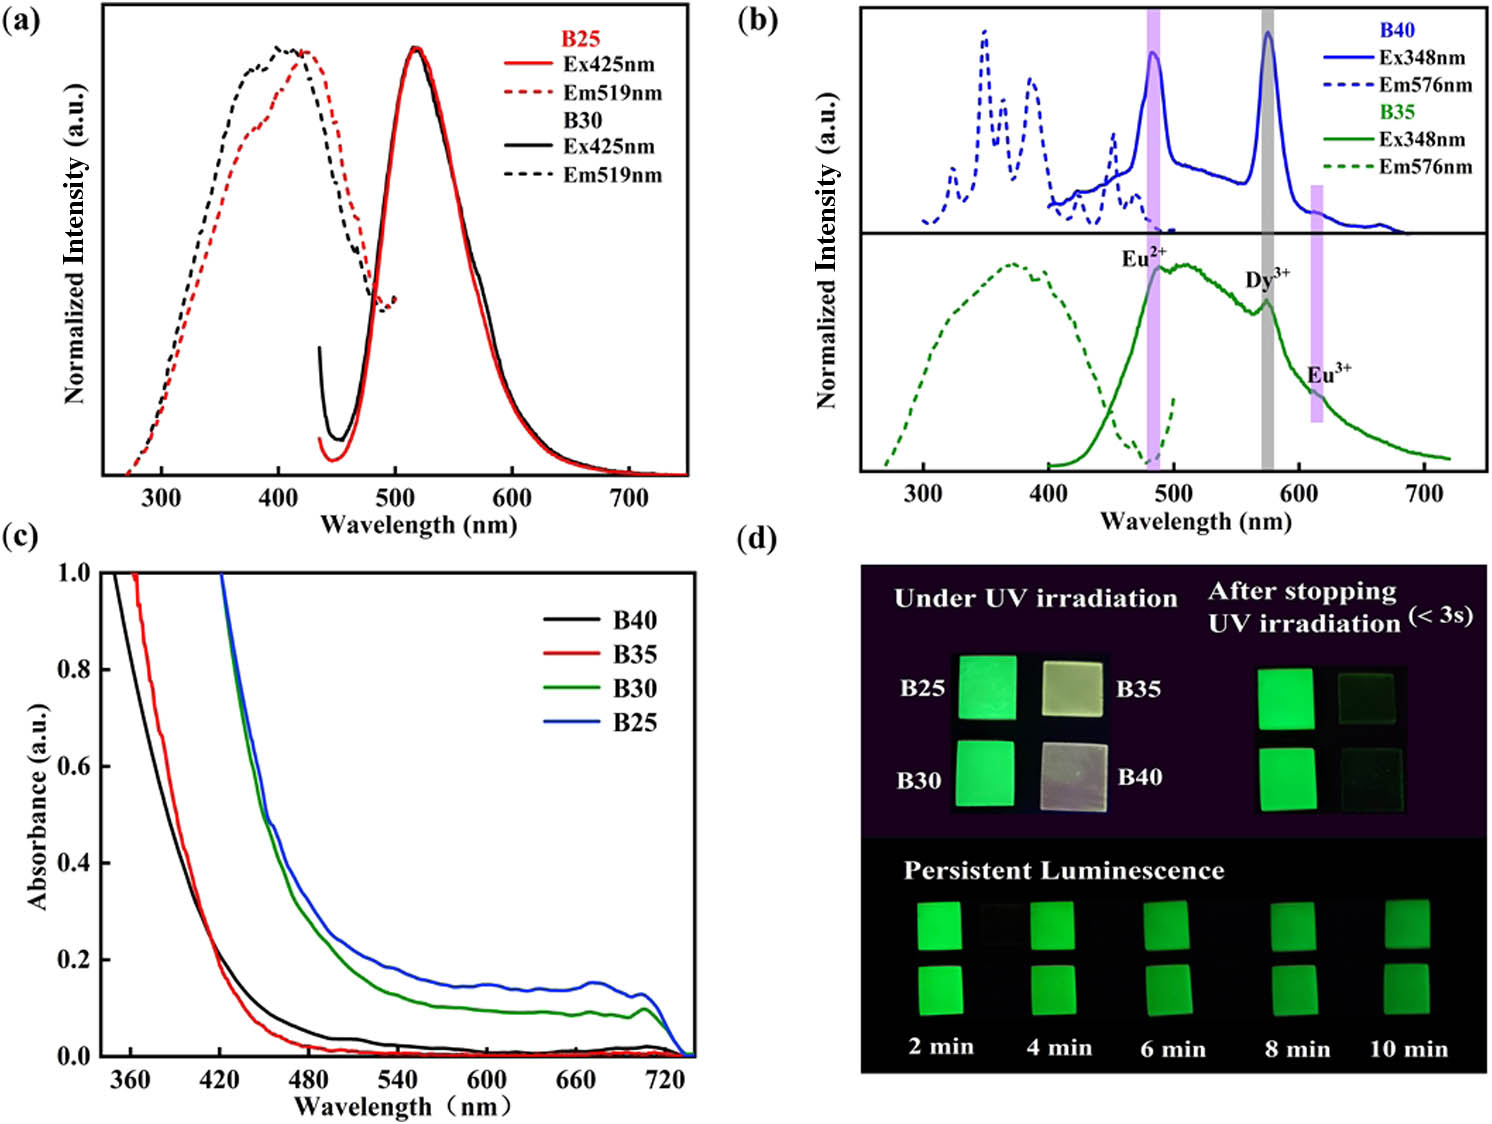 PL properties of SrAl2O4 glass at room temperature. (a) PLE and PL spectra of B25 and B30 glass samples. (b) PLE and PL spectra of B35 and B40 glass samples. (c) Abs spectra of B25–B40 glass samples. (d) Photographs of B25–B40 glass samples under UV excitation and after 5 min UV light irradiation.